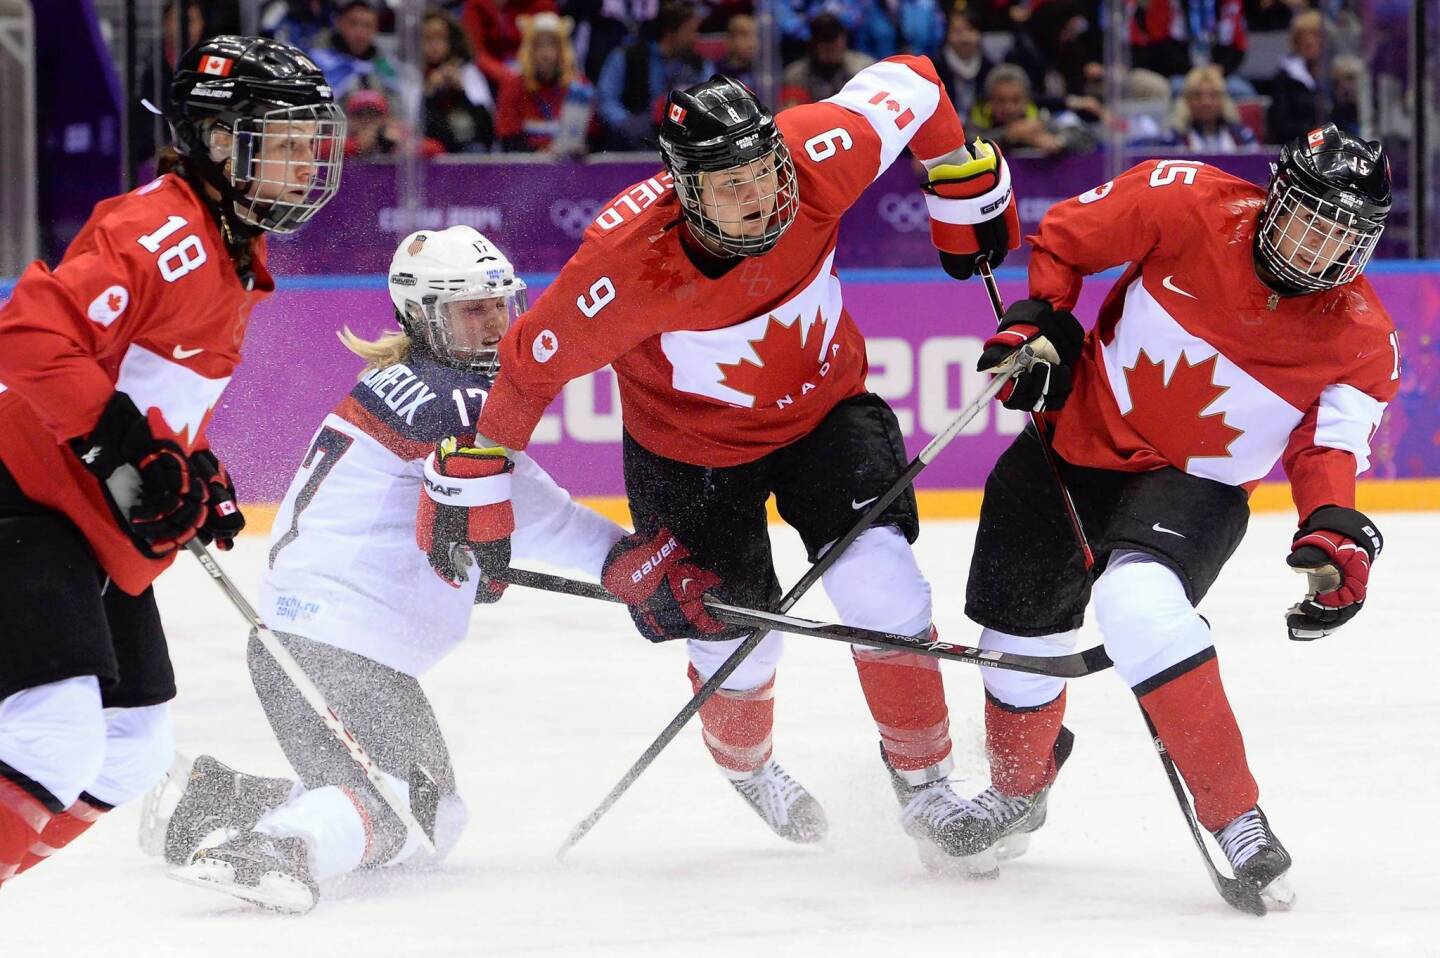 Jocelyne Lamoureux, of the U.S., vies for the puck with Canada's Catherine Ward, Jennifer Wakefield and Melodie Daoust during the women's ice hockey gold medal game.